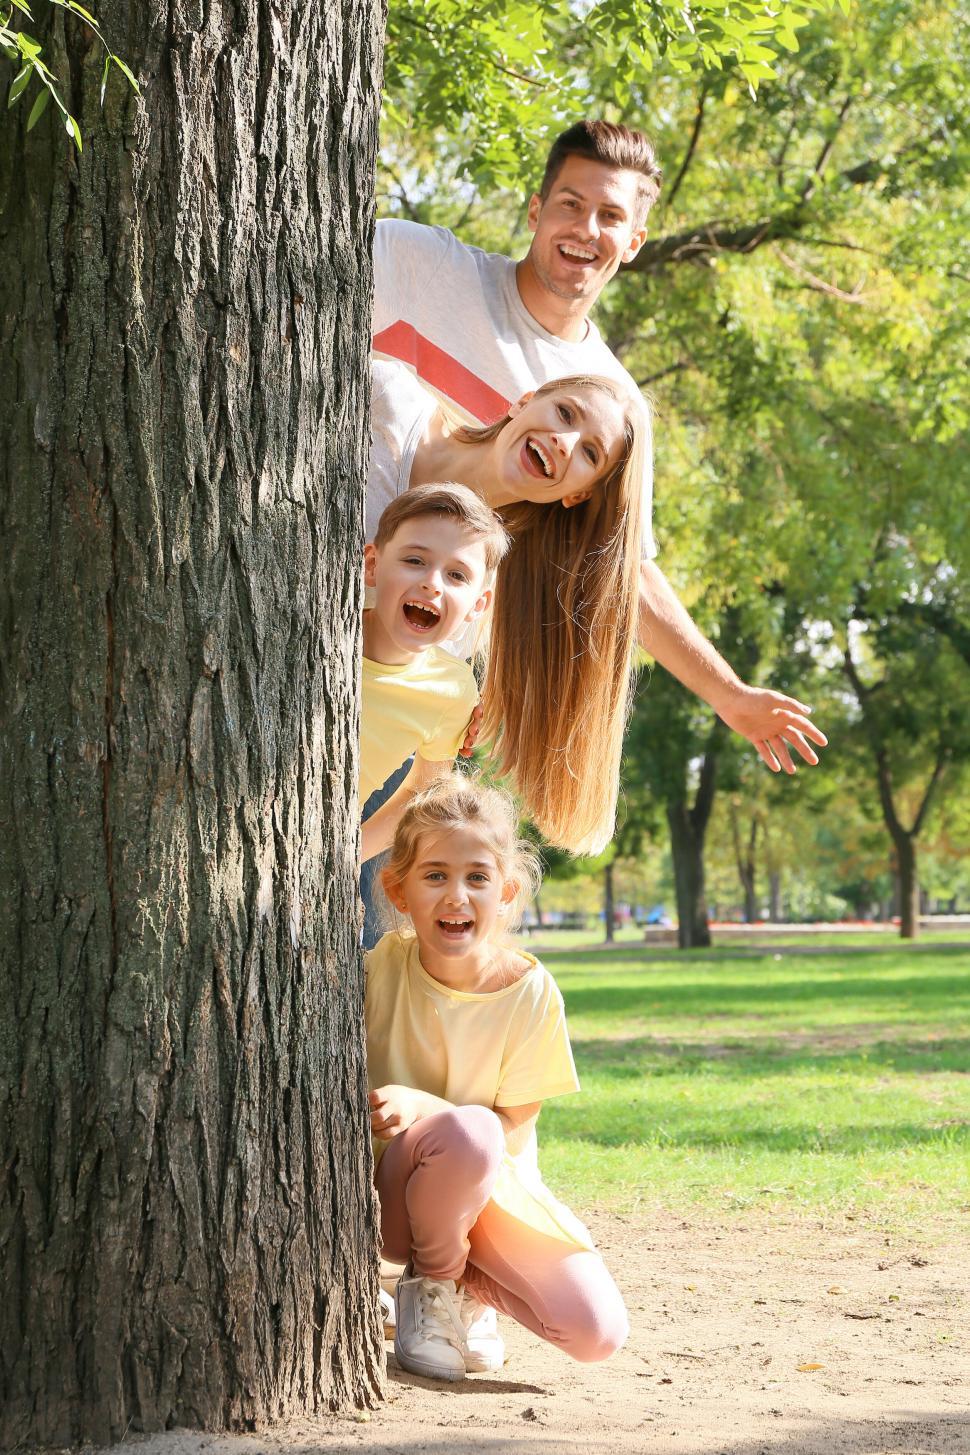 Free Image of Family playing behind a tree in park 